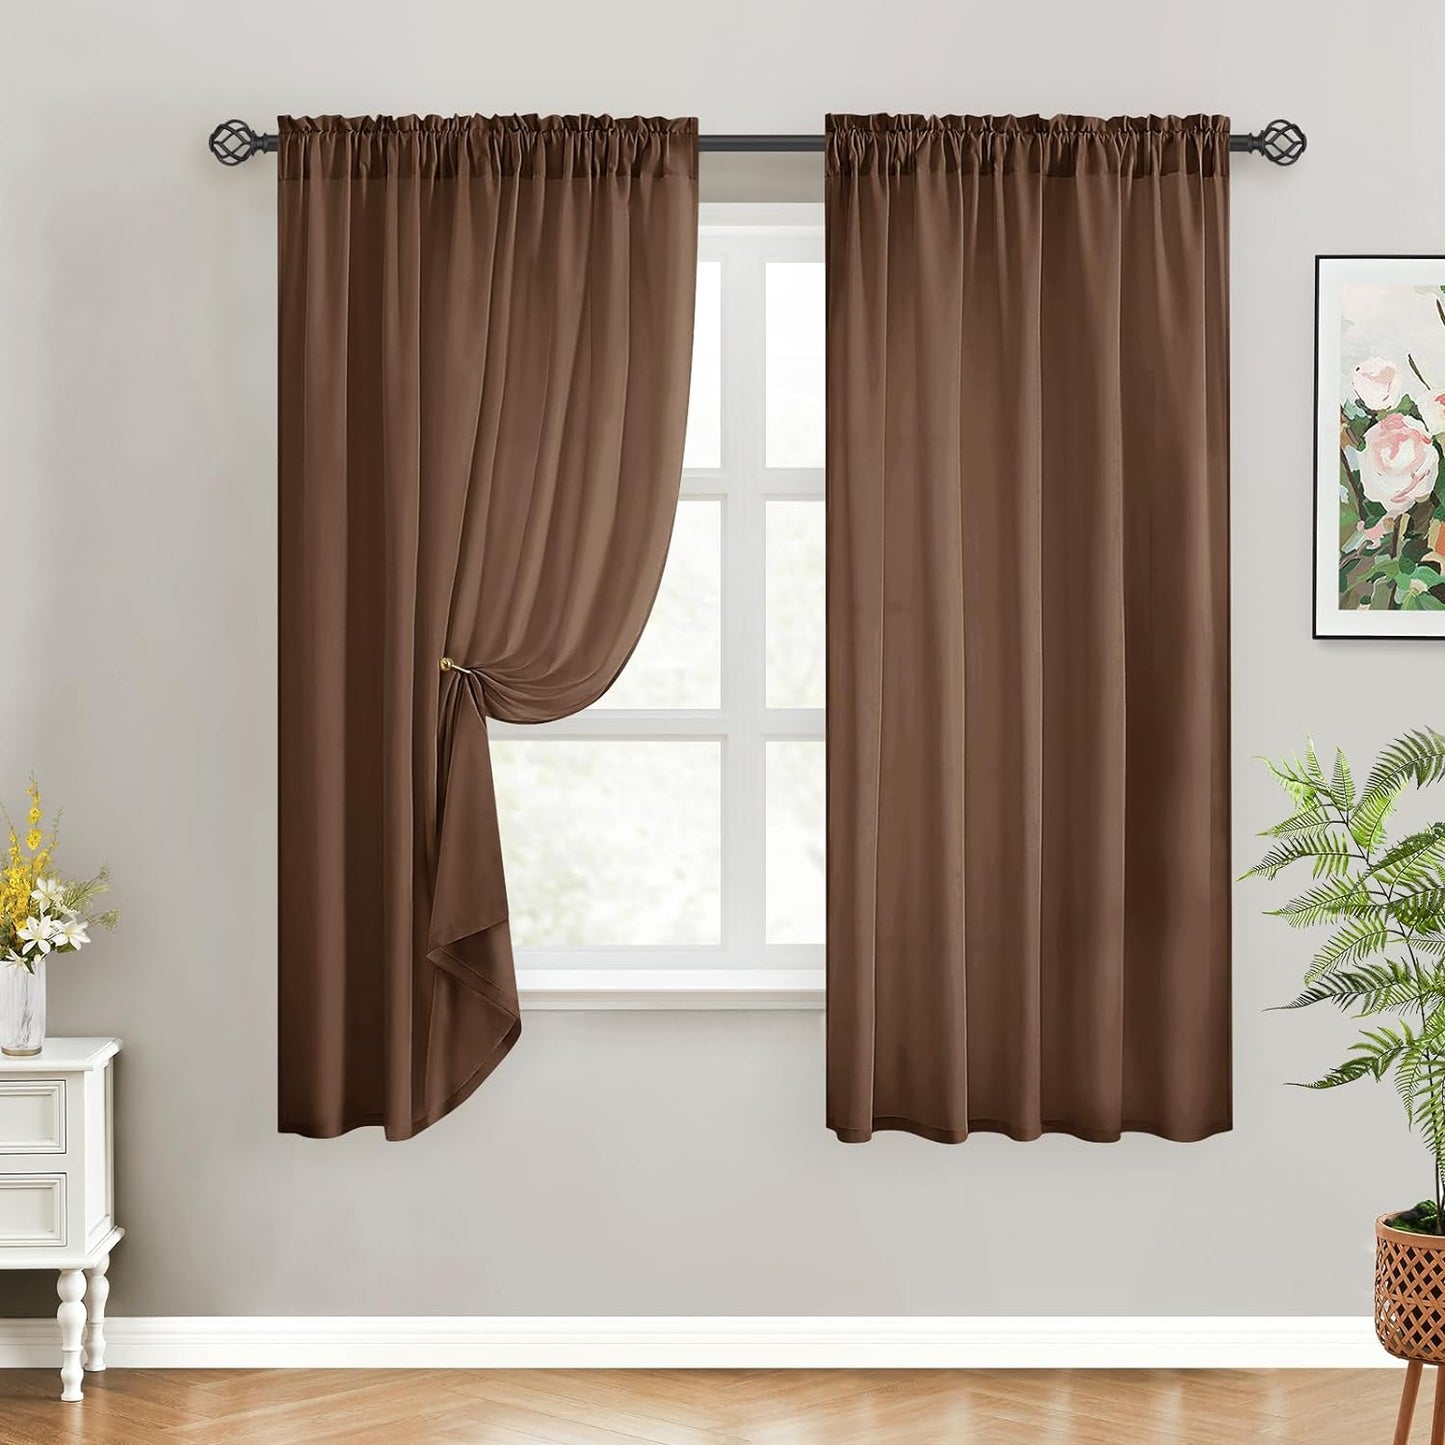 HOMEIDEAS Non-See-Through White Privacy Sheer Curtains 52 X 84 Inches Long 2 Panels Semi Sheer Curtains Light Filtering Window Curtains Drapes for Bedroom Living Room  HOMEIDEAS Brown W52" X L45" 